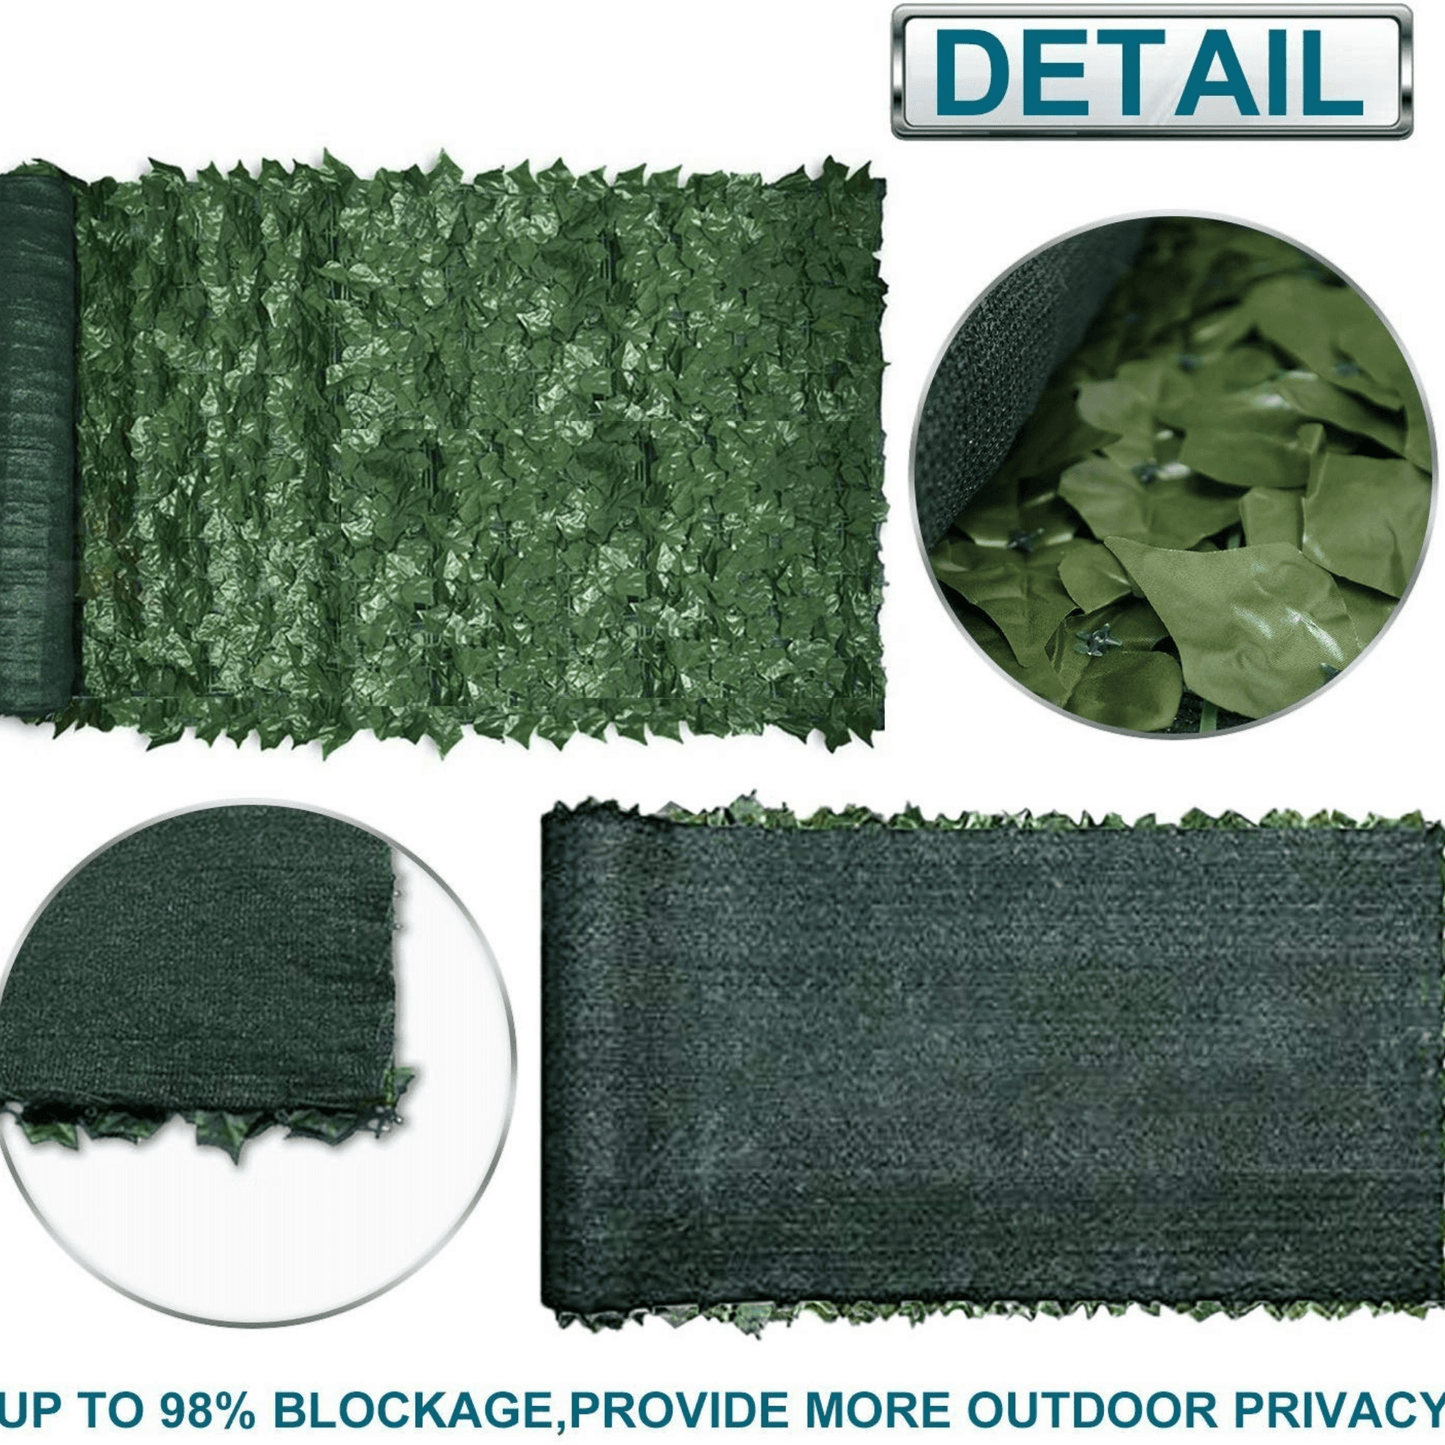 Faux Ivy Privacy Fence Shade Cloth Backing 120"L x 40"H 33SQ FT